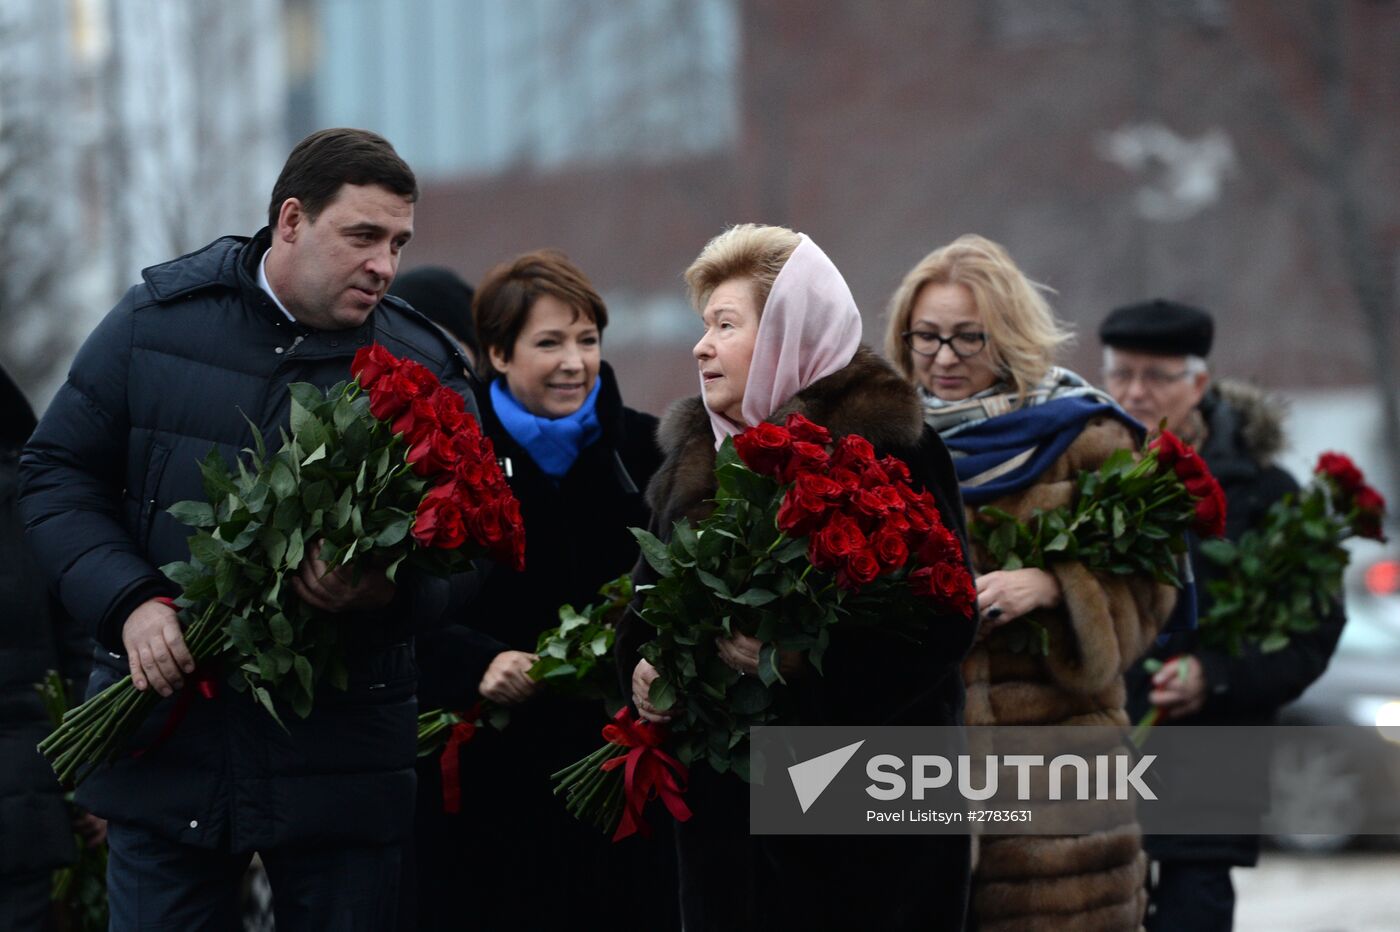 Events dedicated to first Russian President Boris Yeltsin's 85th anniversary